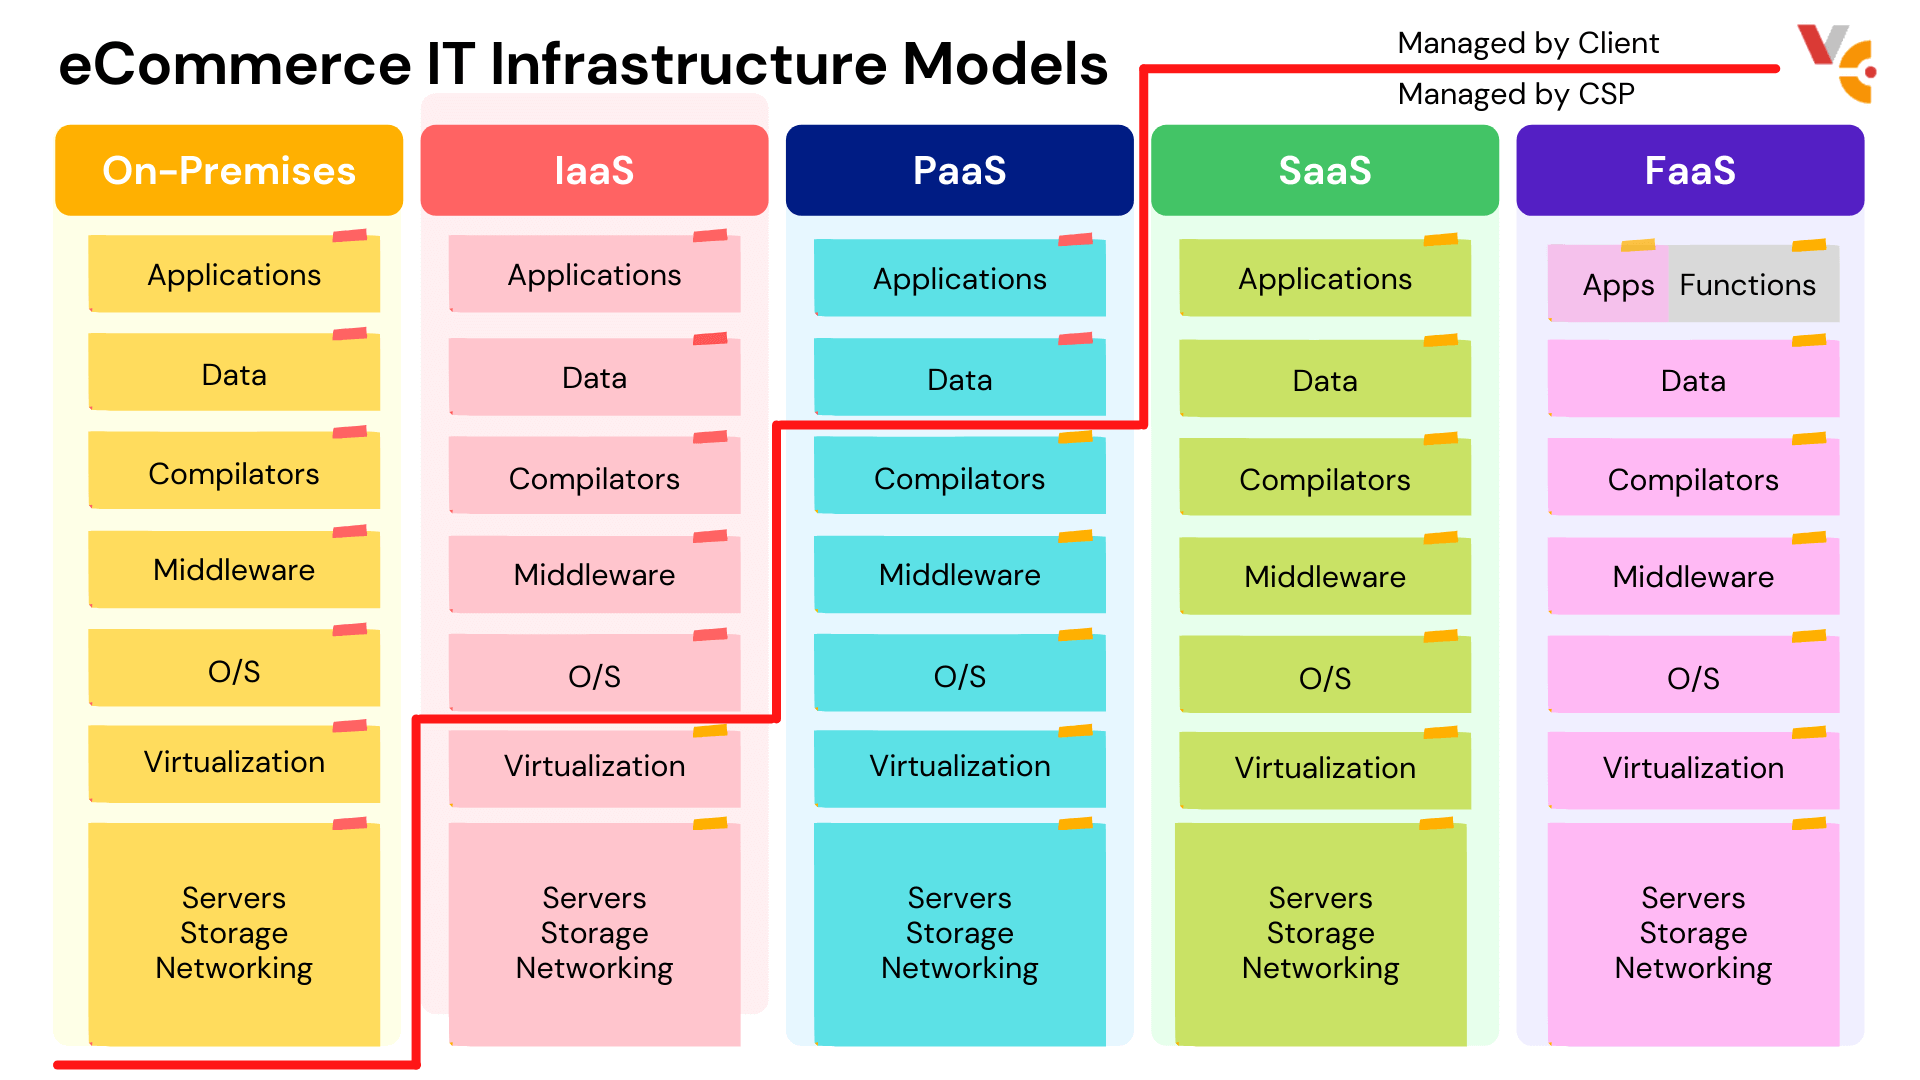 This diagram shows different options for which software is served by the provider and which are done in house. Let’s go over what SaaS, PaaS, and IaaS mean below.